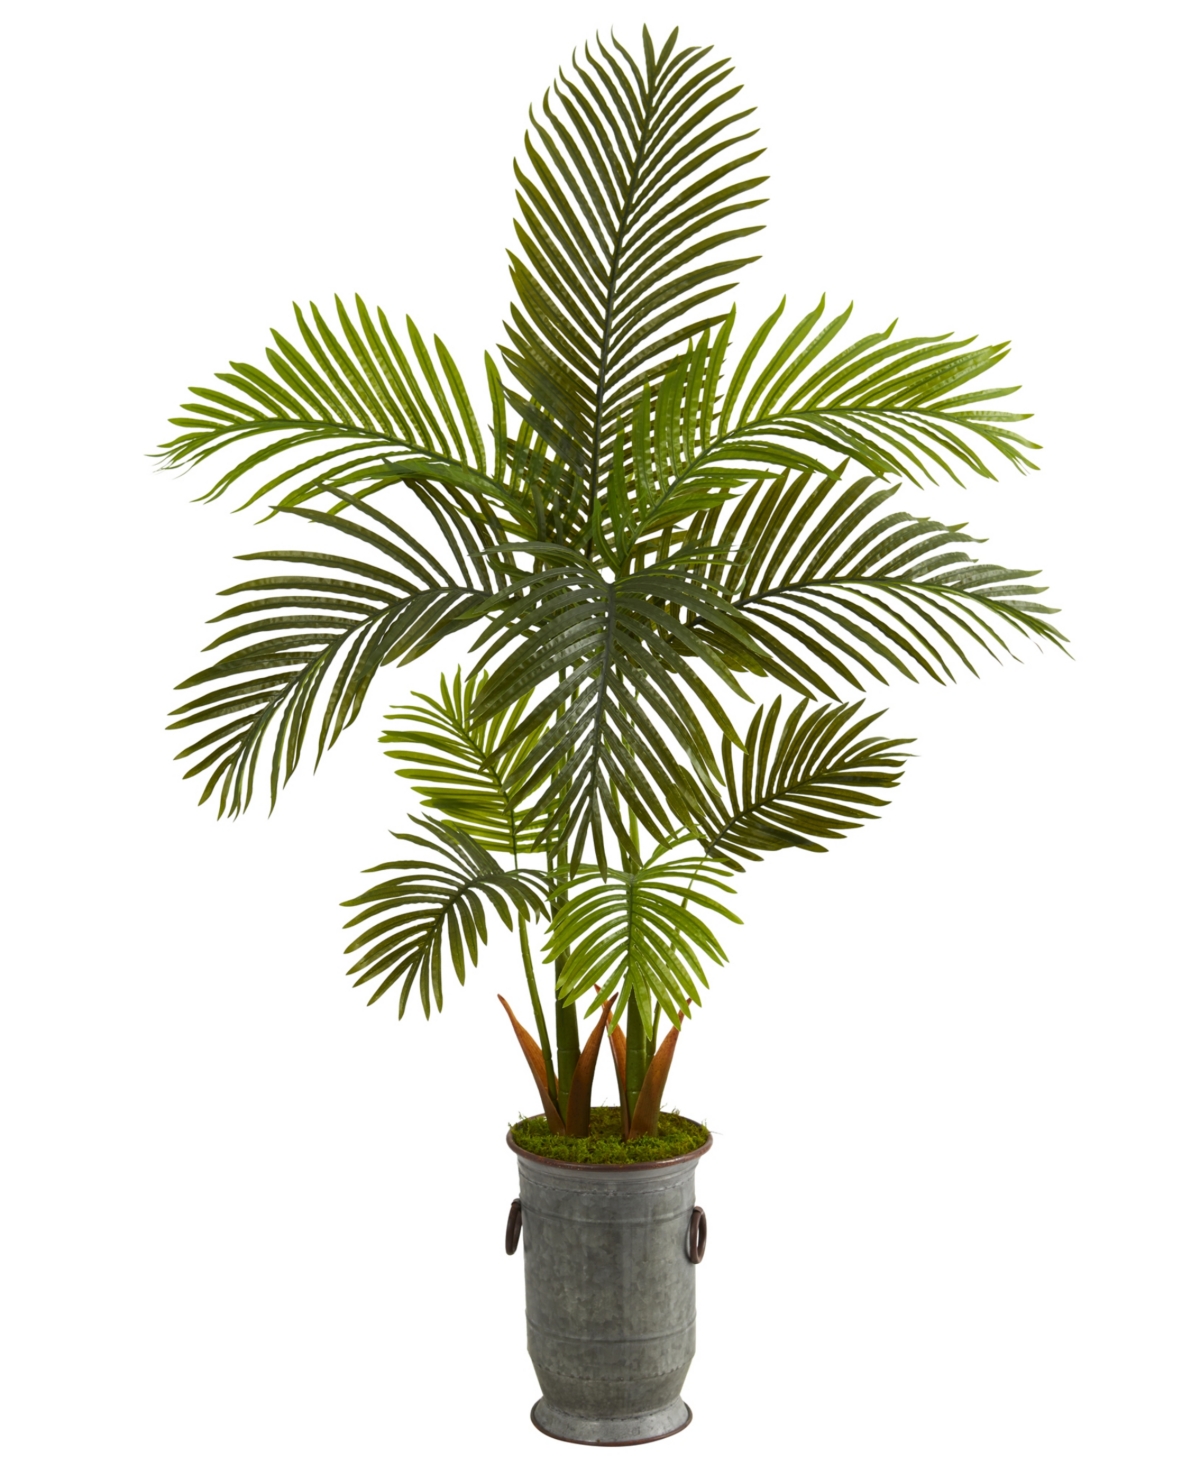 58in. Areca Palm Artificial Tree in Vintage Metal Planter - Green